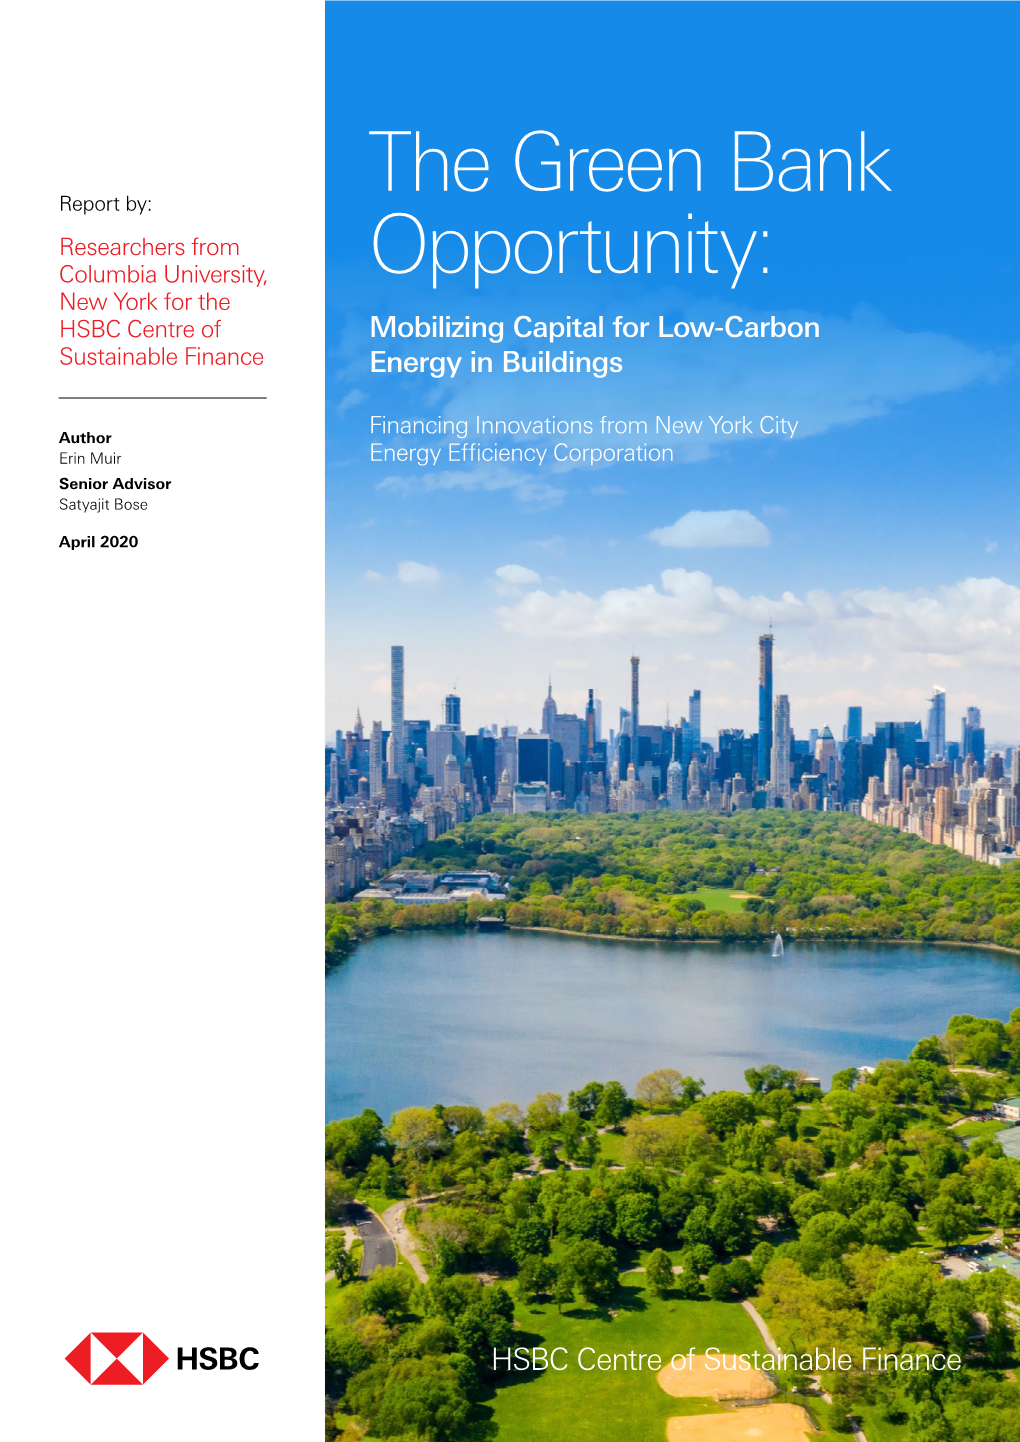 The Green Bank Opportunity: Mobilizing Capital for Low-Carbon Energy in Buildings